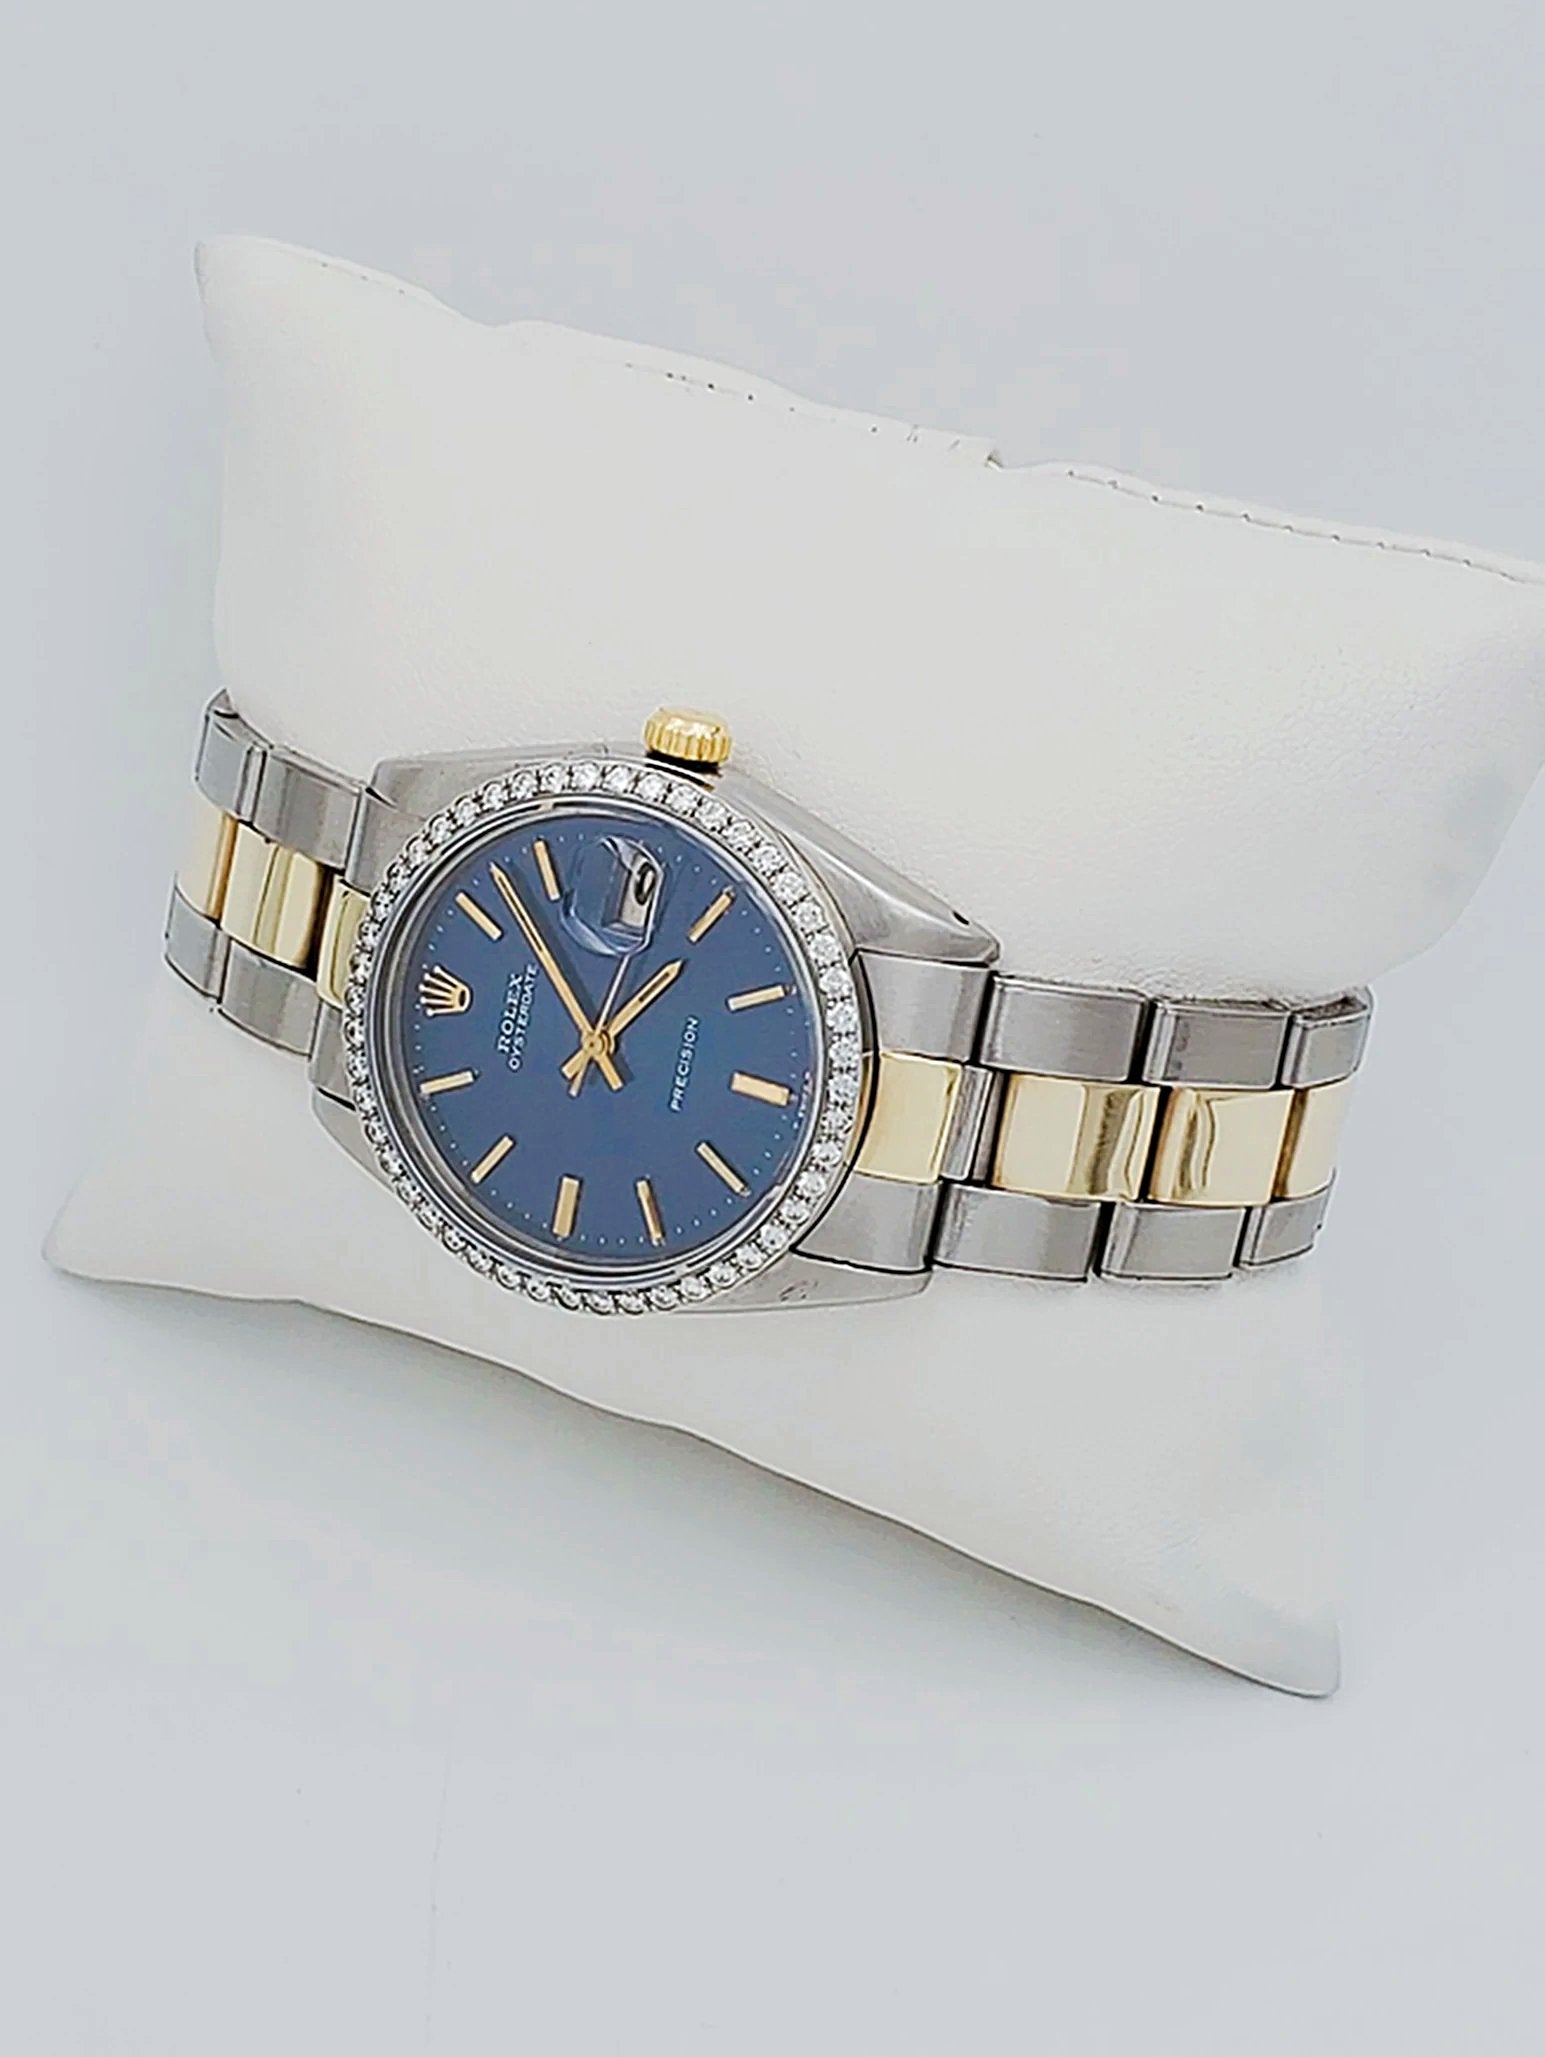 Unisex Rolex OysterDate 34mm Two Tone 14K Yellow Gold / Stainless Steel Watch with Blue Dial and Custom Diamond Bezel. (Pre-Owned 6694)